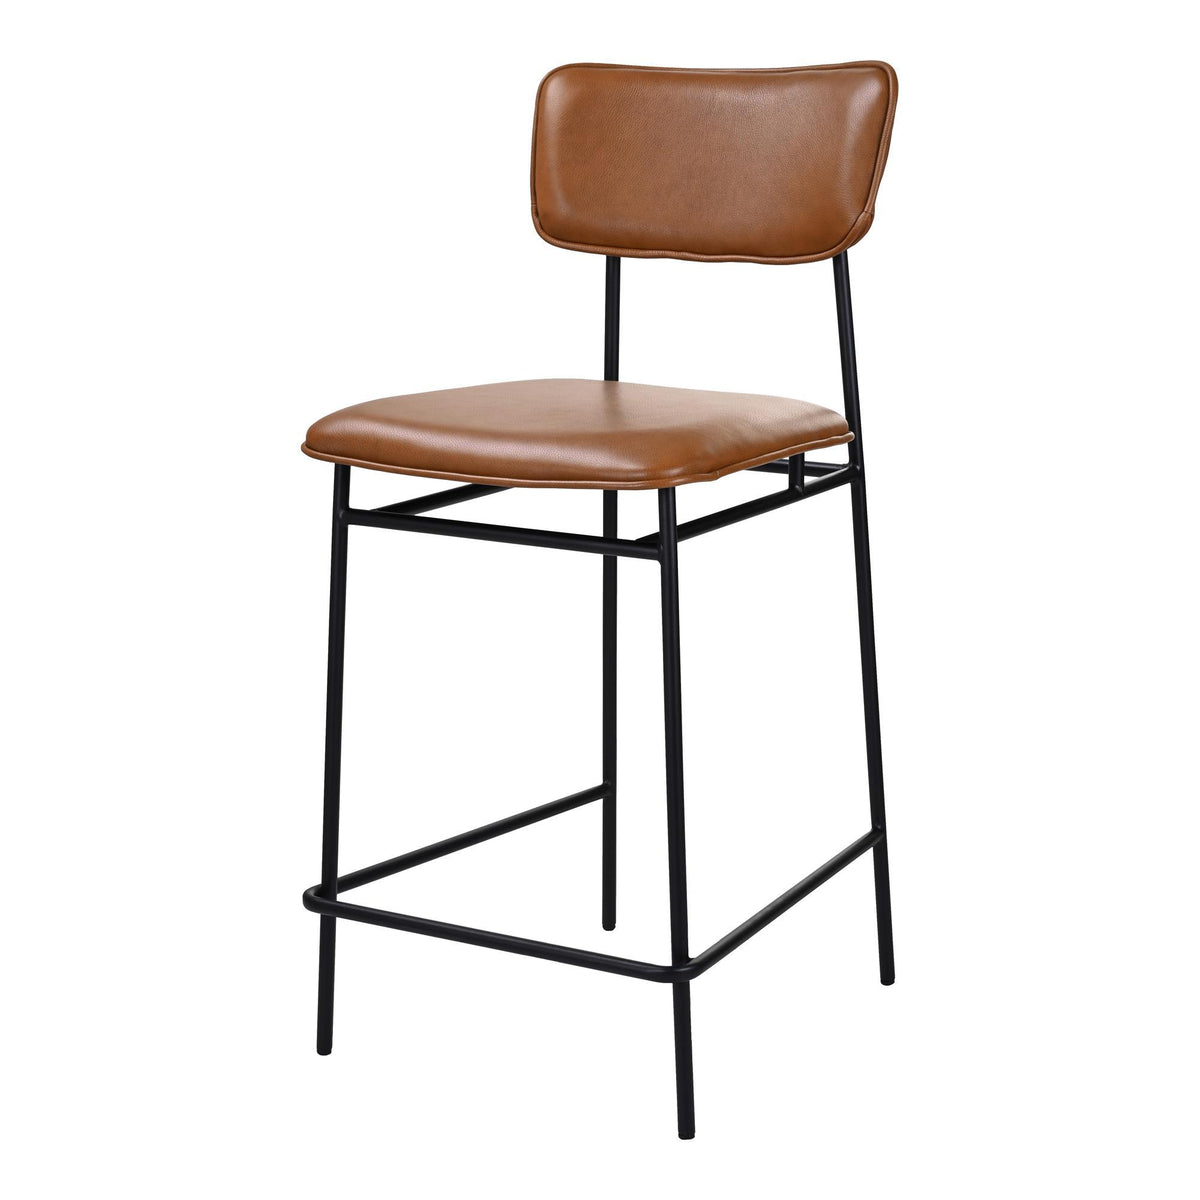 Moe's Home Collection Sailor Counter Stool Brown - EQ-1015-03